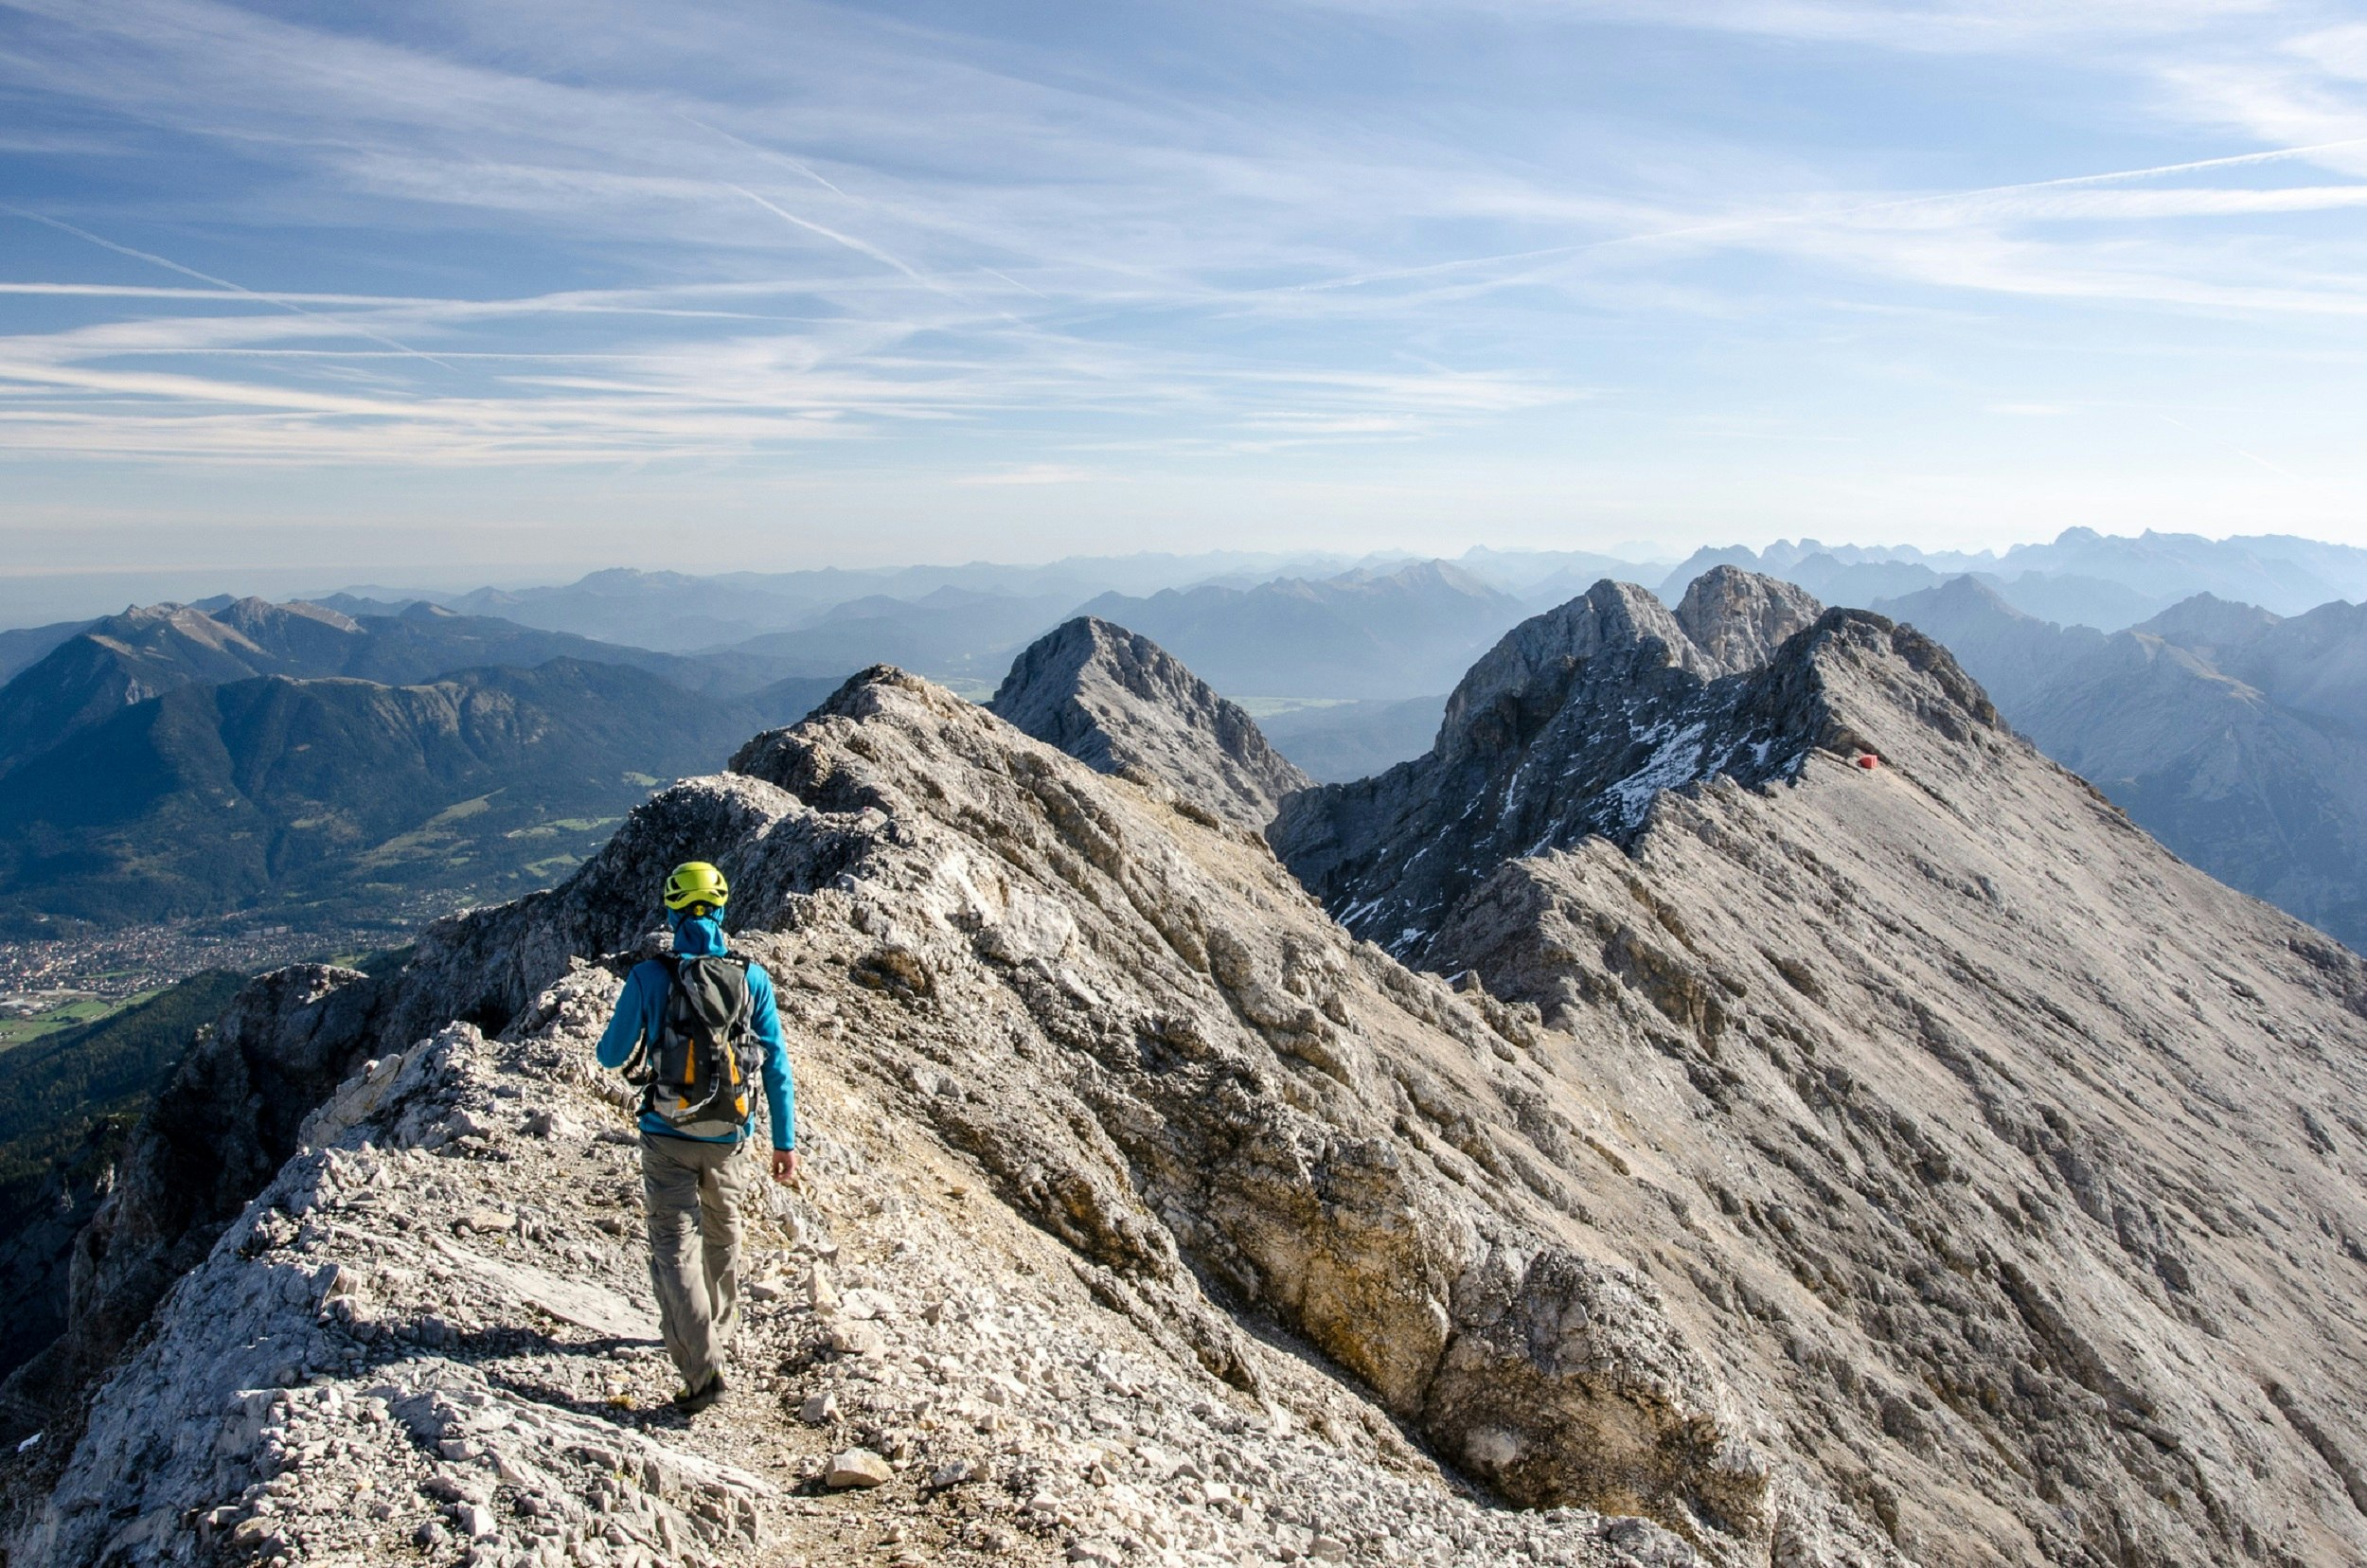 A man in a backpack and helmet walks along a rocky summit ridge high above distant alpine valleys.